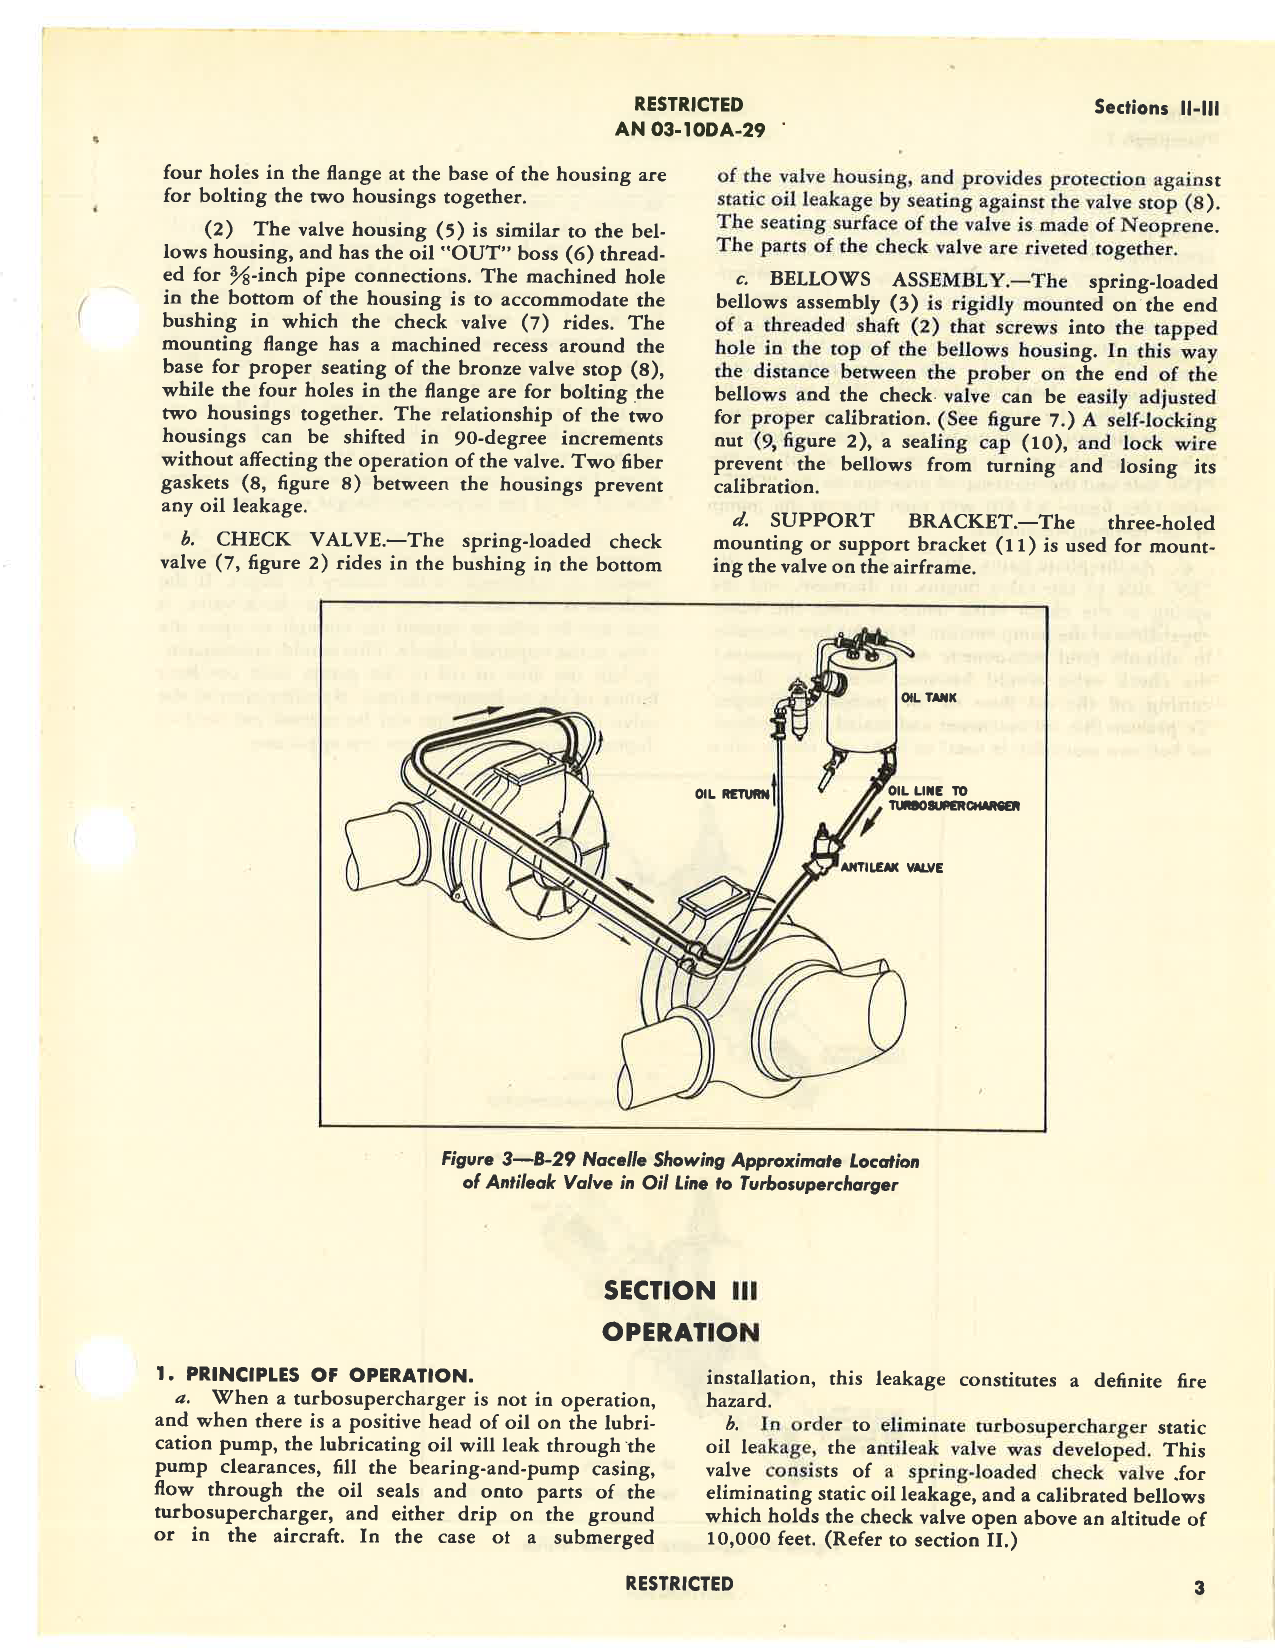 Sample page 7 from AirCorps Library document: Overhaul Instructions with Parts Catalog for Model 7H-VE1 Barometric Antileak Valve